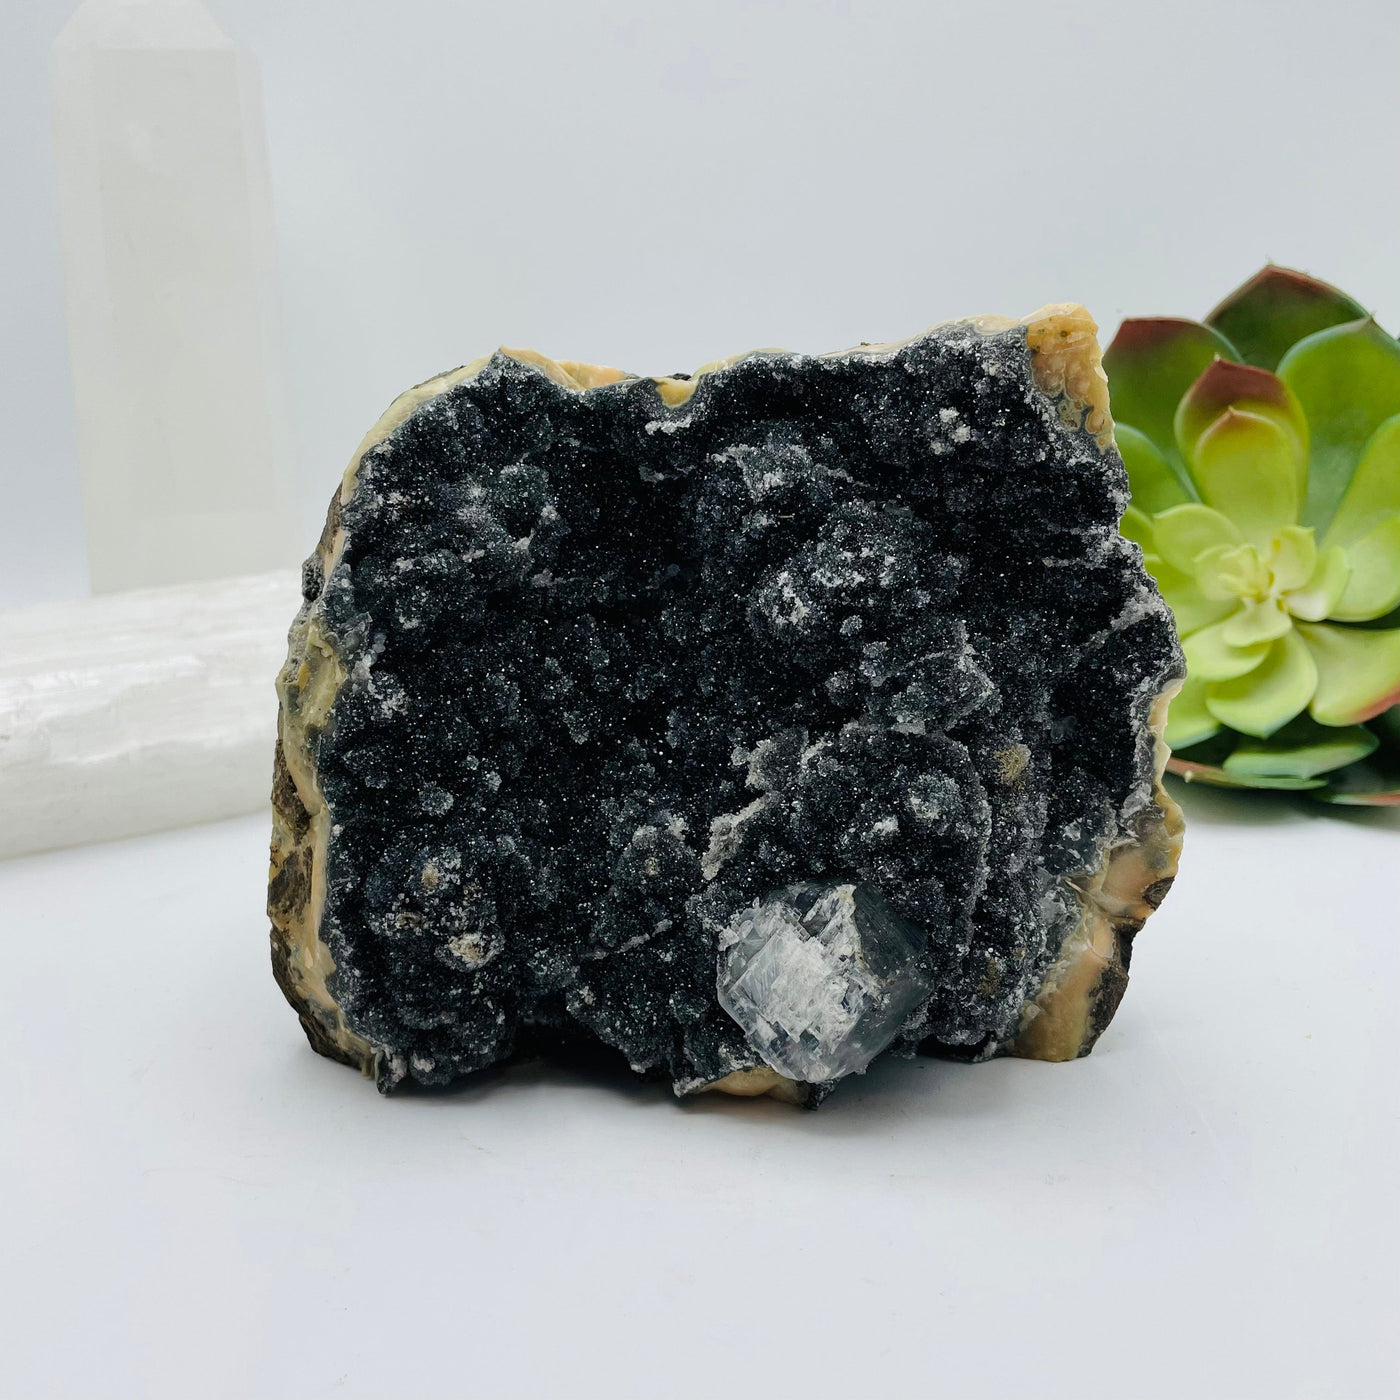 Black druzy amethyst cut base with decorations in the background